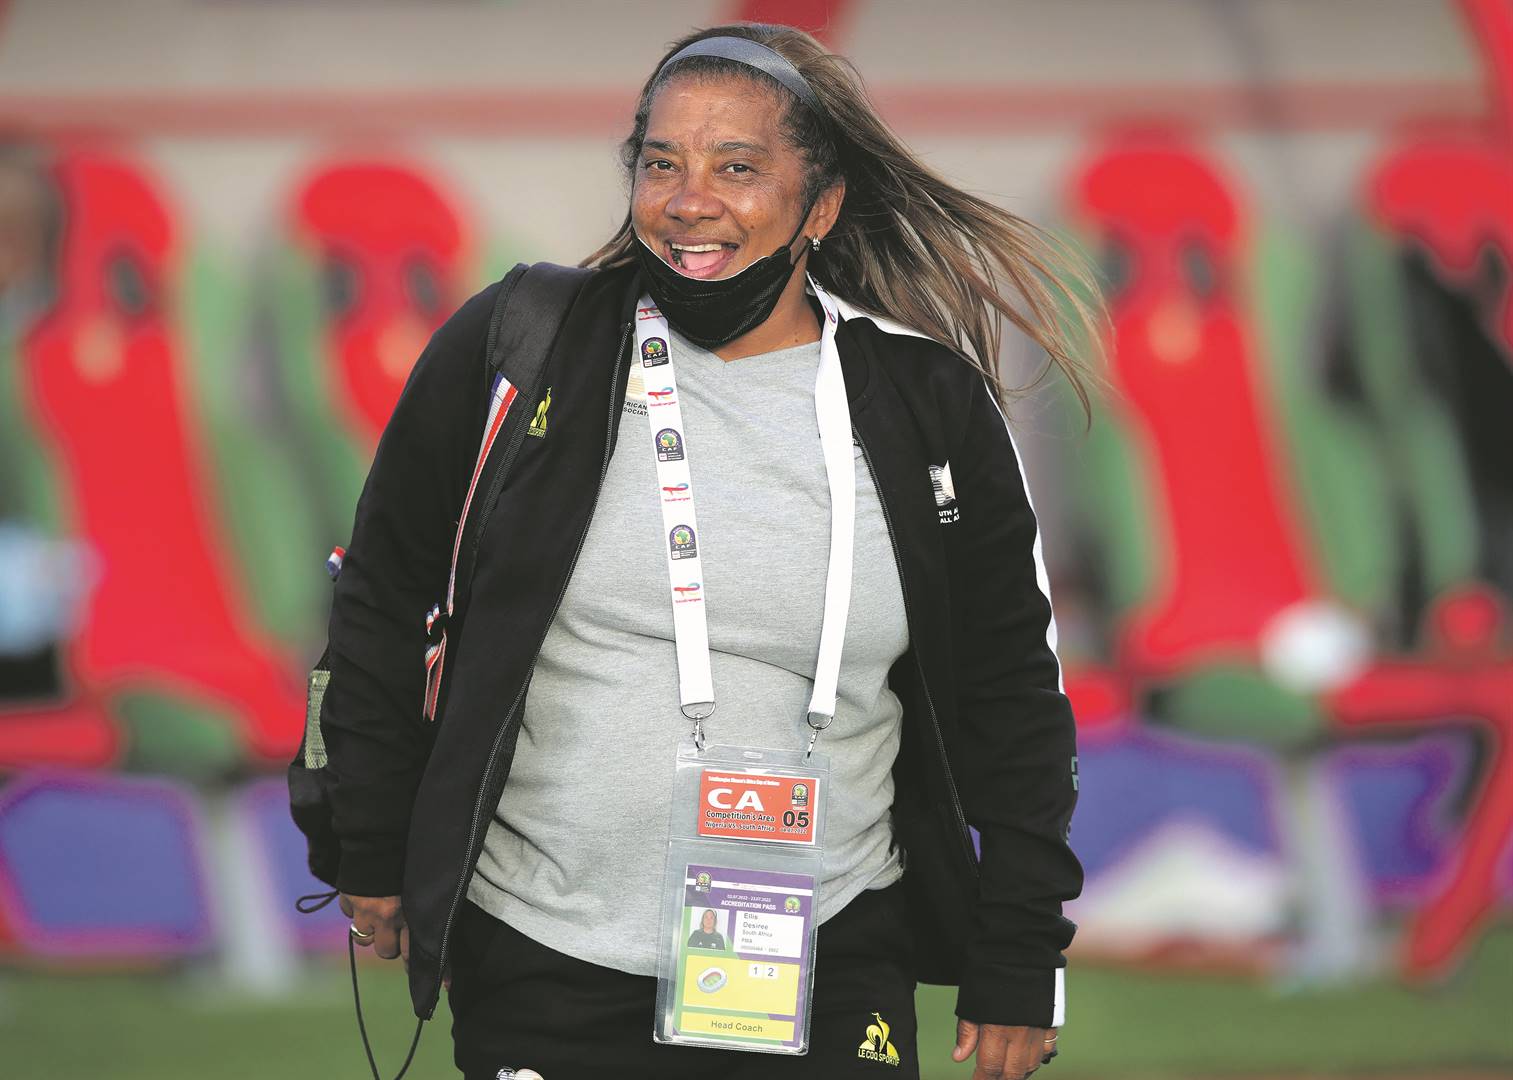 Banyana Banyana coach, Desiree Ellis, is happy with her girls’ showing when they defeated Nigeria.Photos by Samuel Shivambu/BackpagePix